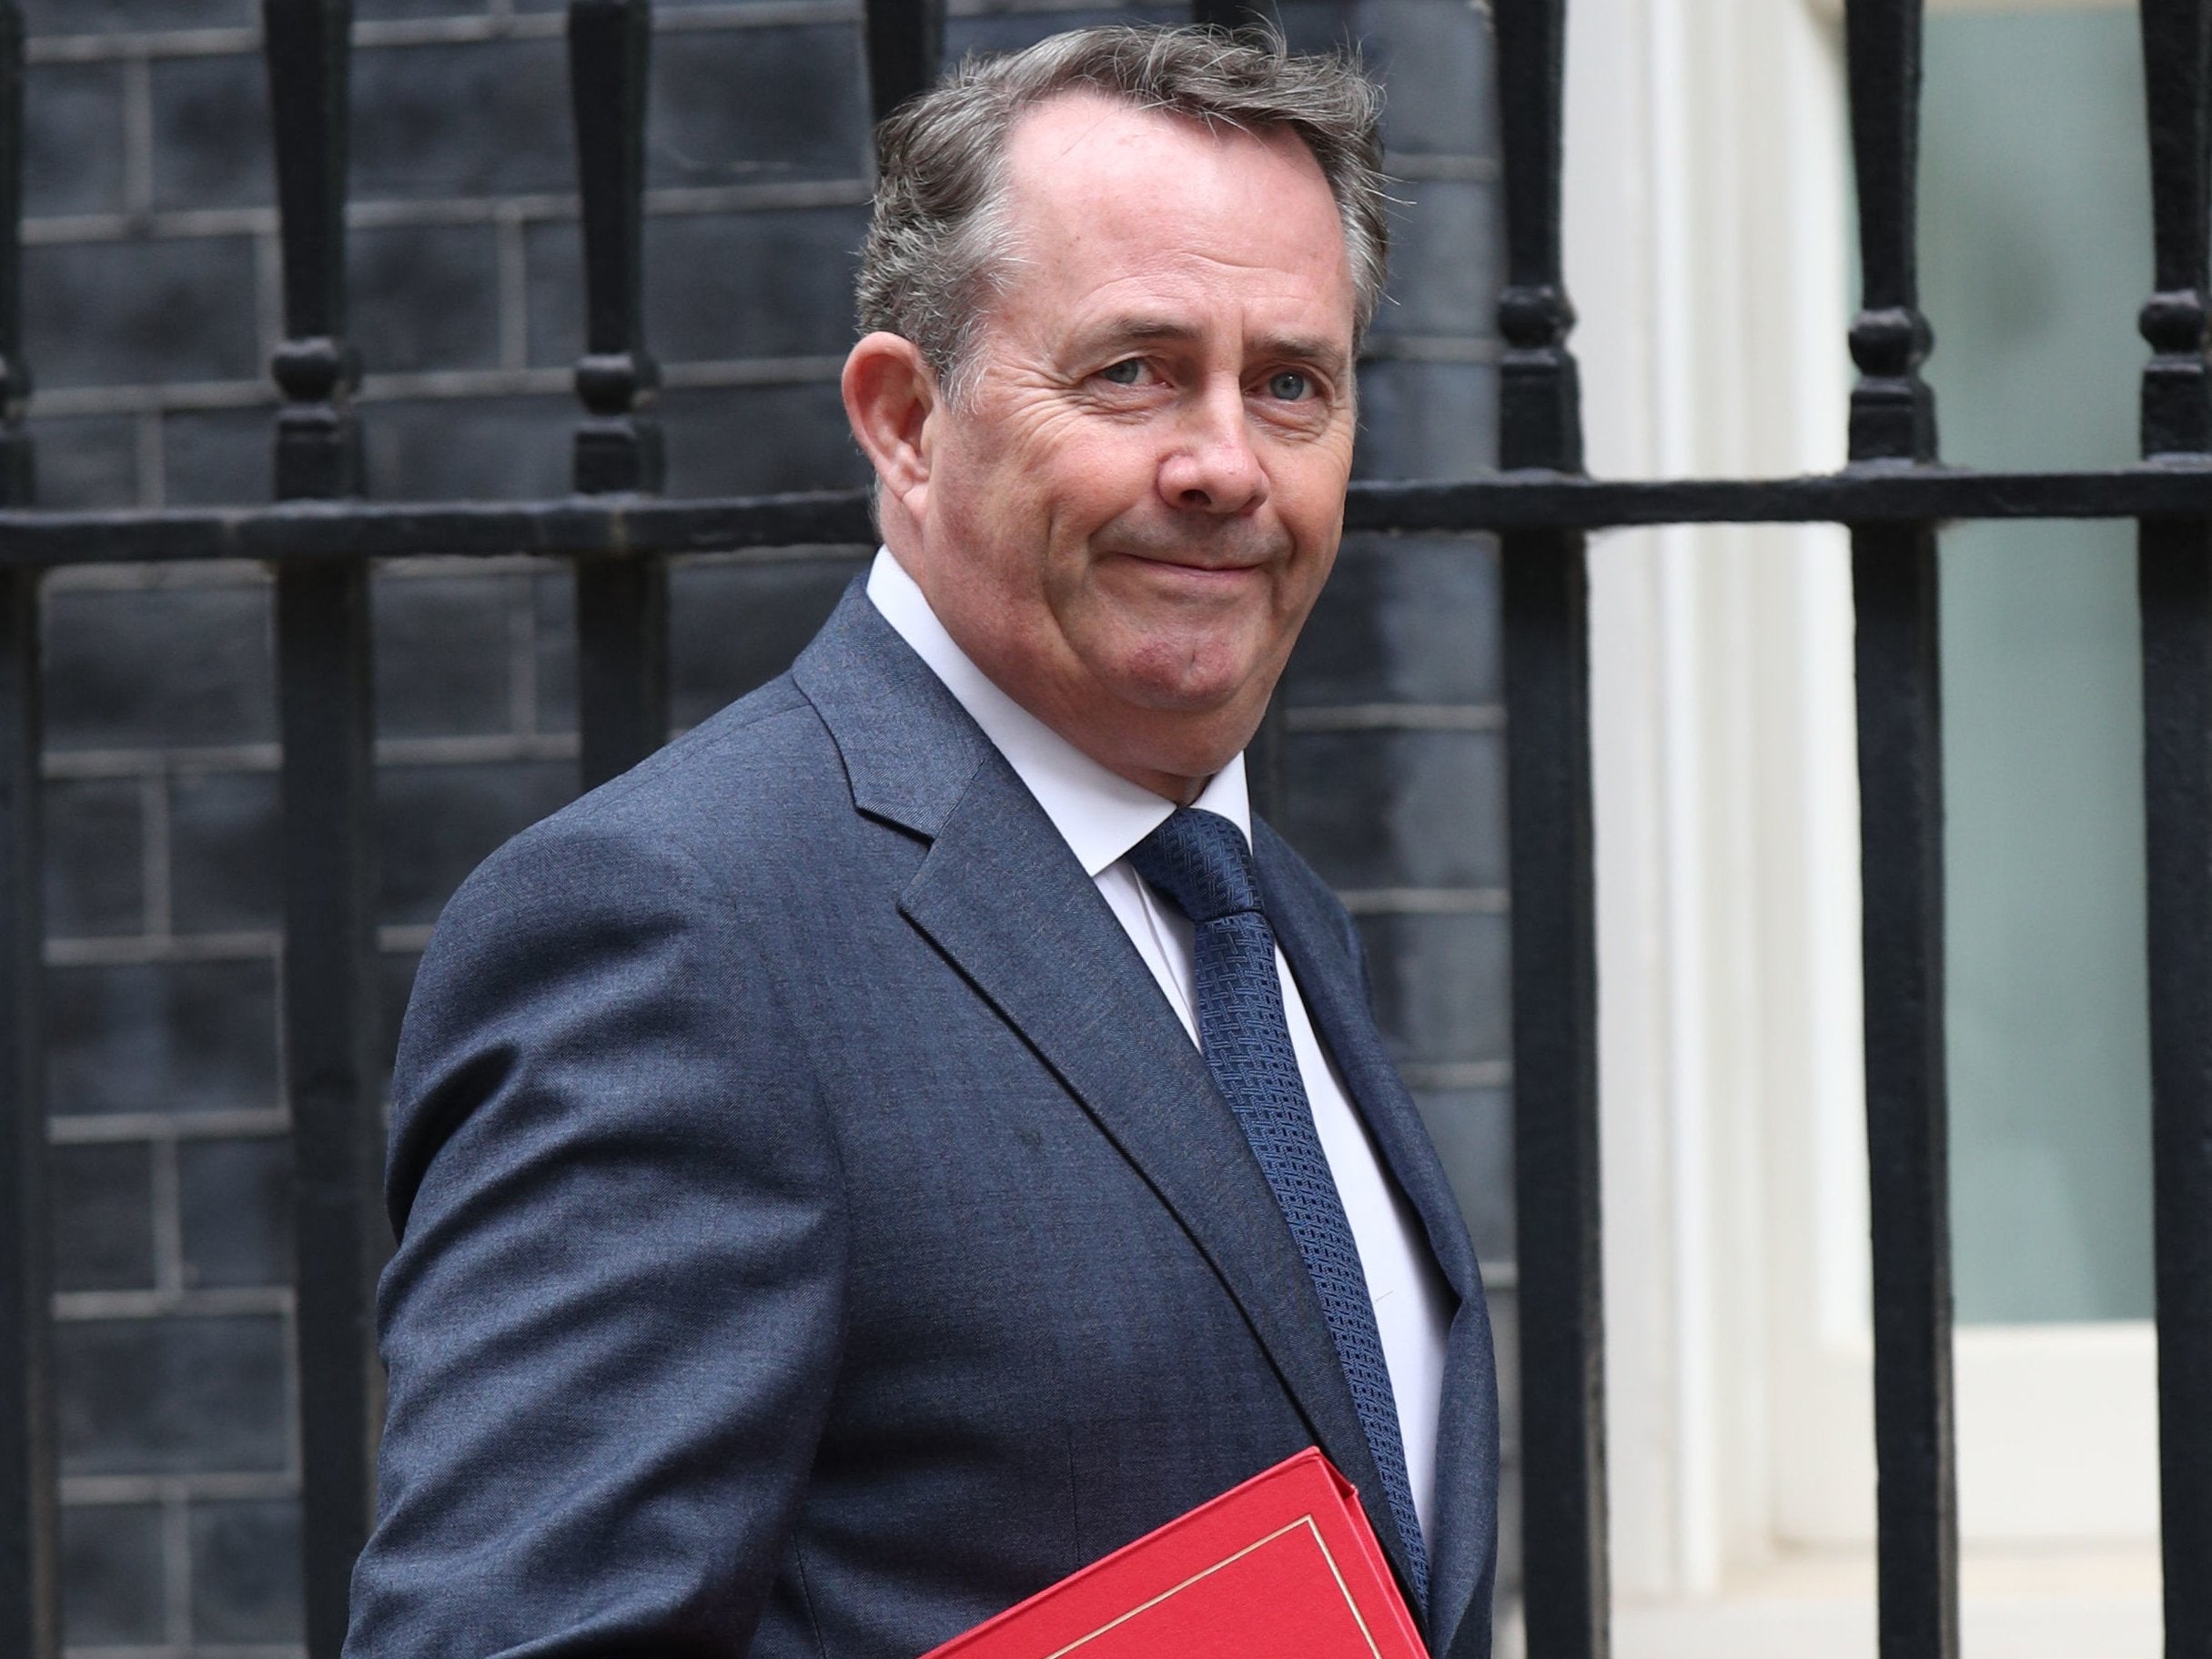 Dr Liam Fox says the UK remains the top destination in Europe for foreign direct investment